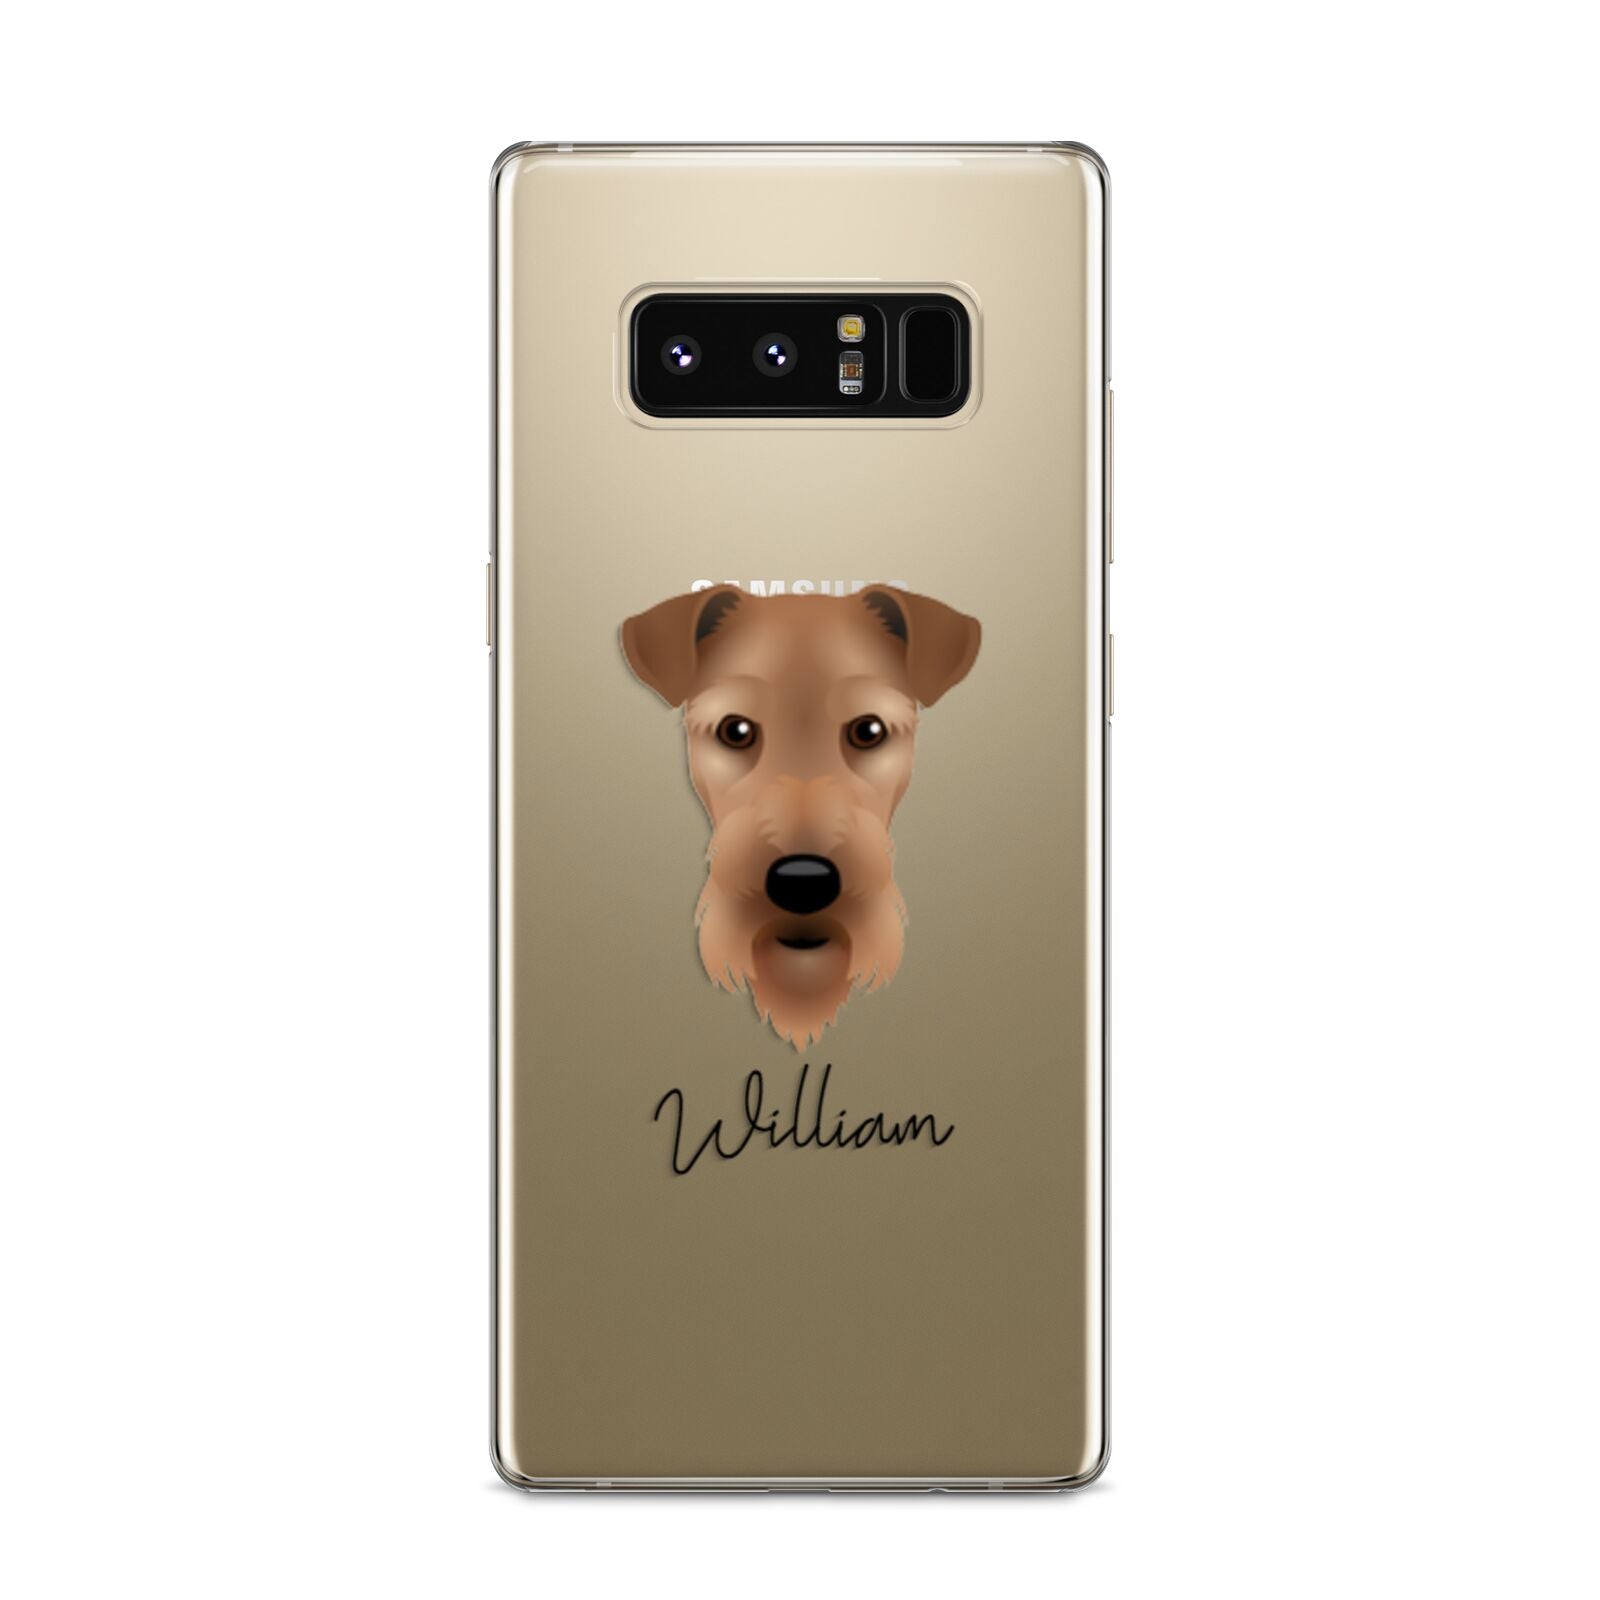 Airedale Terrier Personalised Samsung Galaxy S8 Case